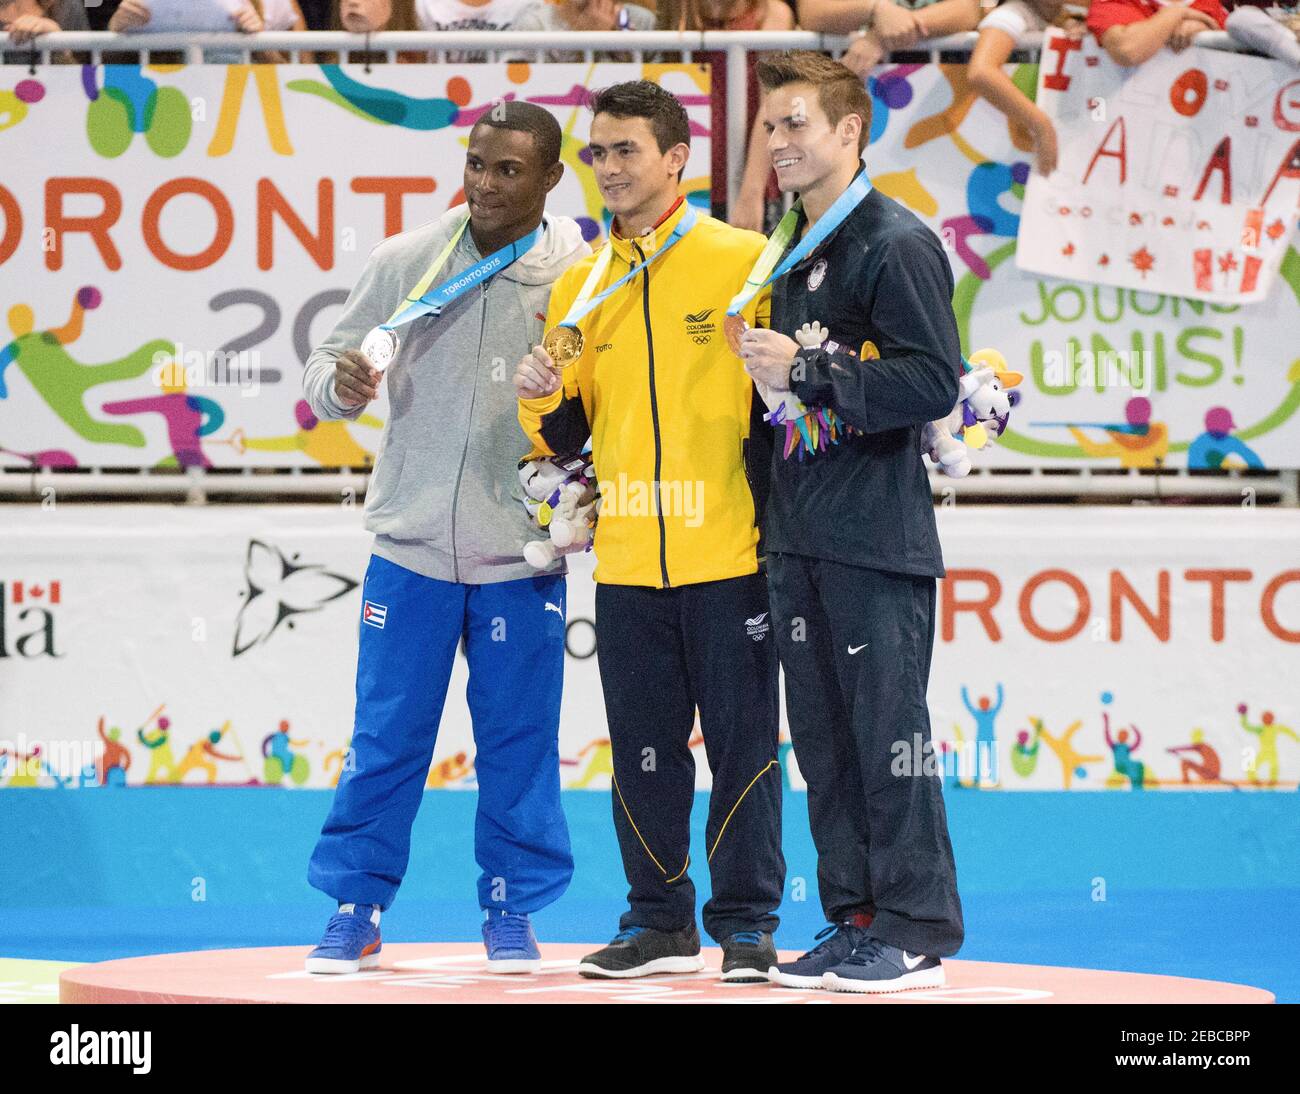 Toronto Panam Games 2015: Medal Ceremony for the parallel bars in gymnastic artistic men. First place Jossimar Calvo Moreno from Colombia, Second plac Stock Photo